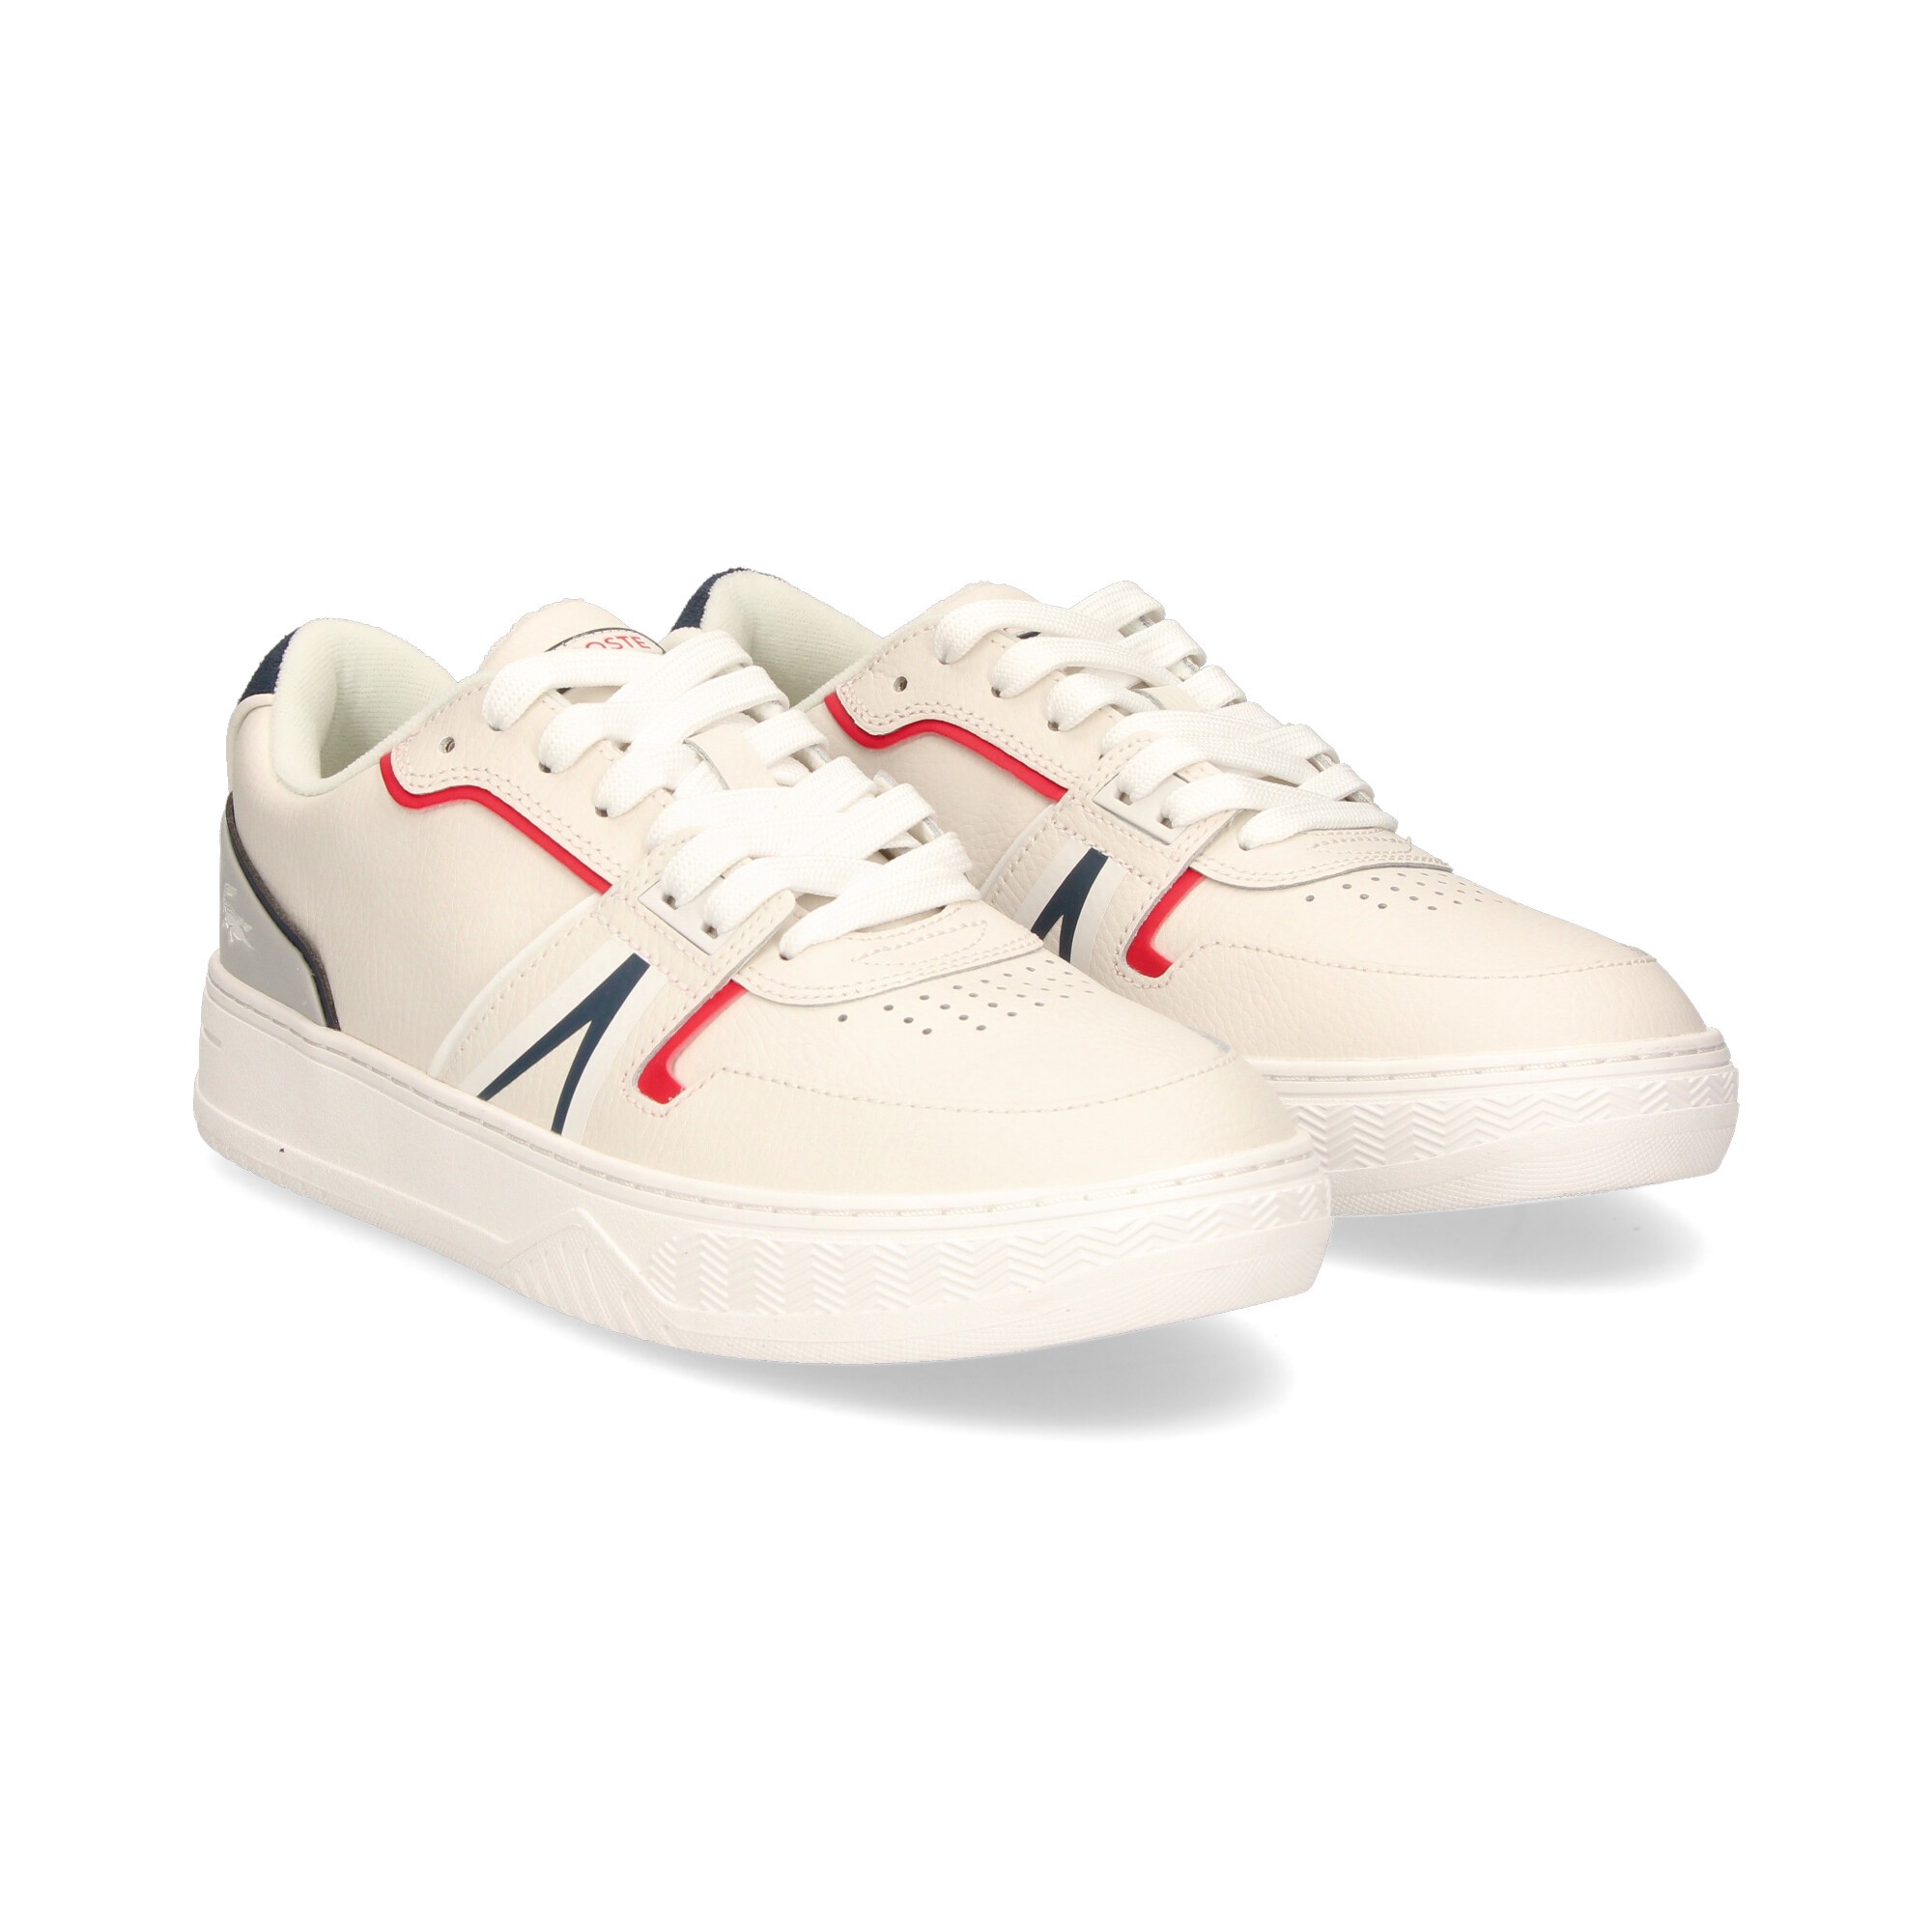 deportivo-blanco-lineas-navy-red